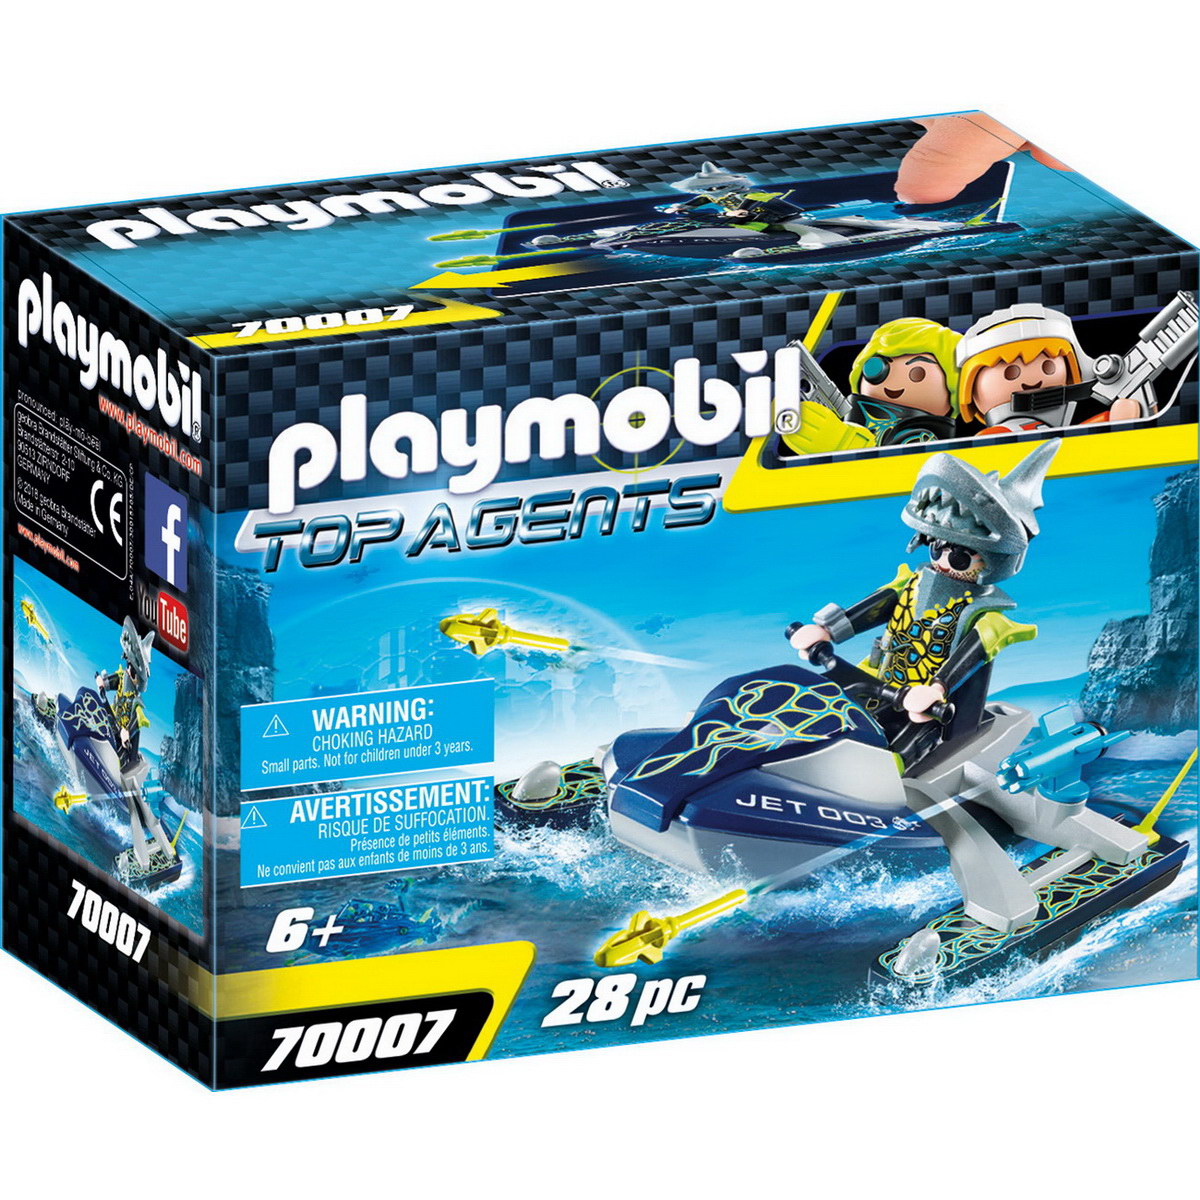 Playmobil 70007 - Team S.H.A.R.K. Rocket Rafter (Top Agents)